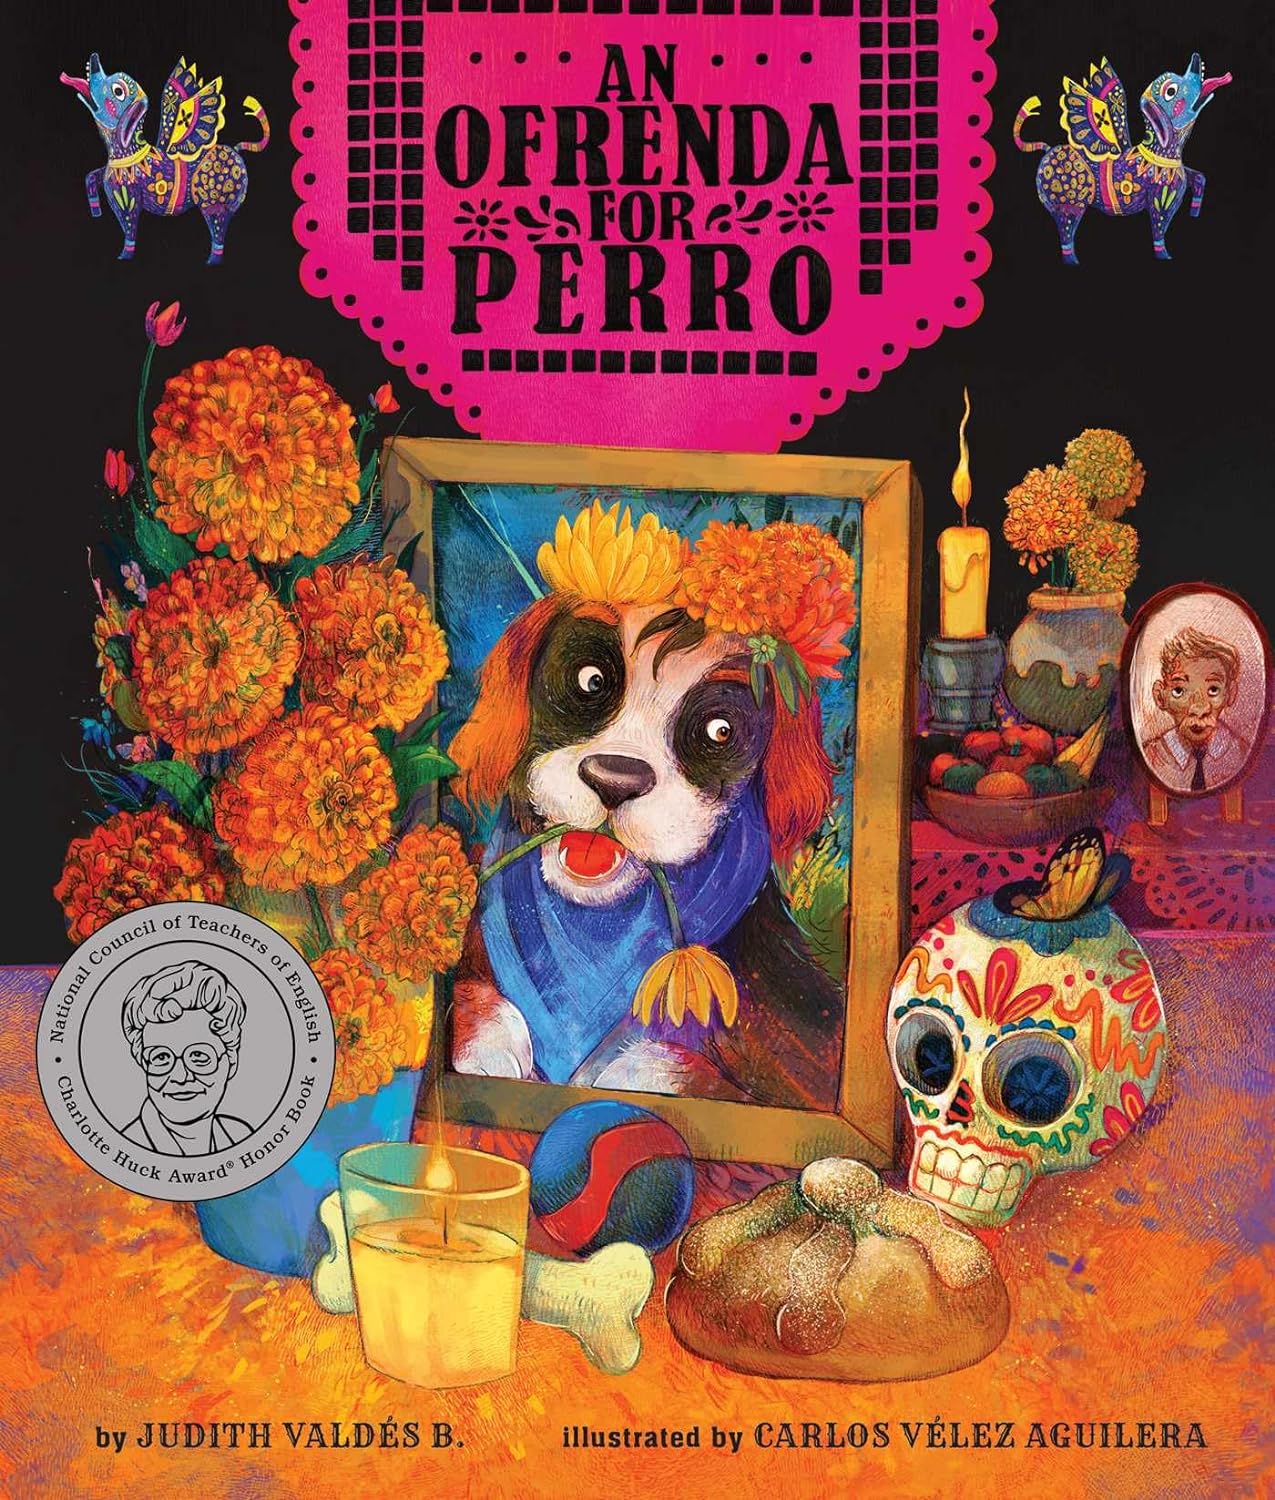 An Ofrenda for Perro Hardcover